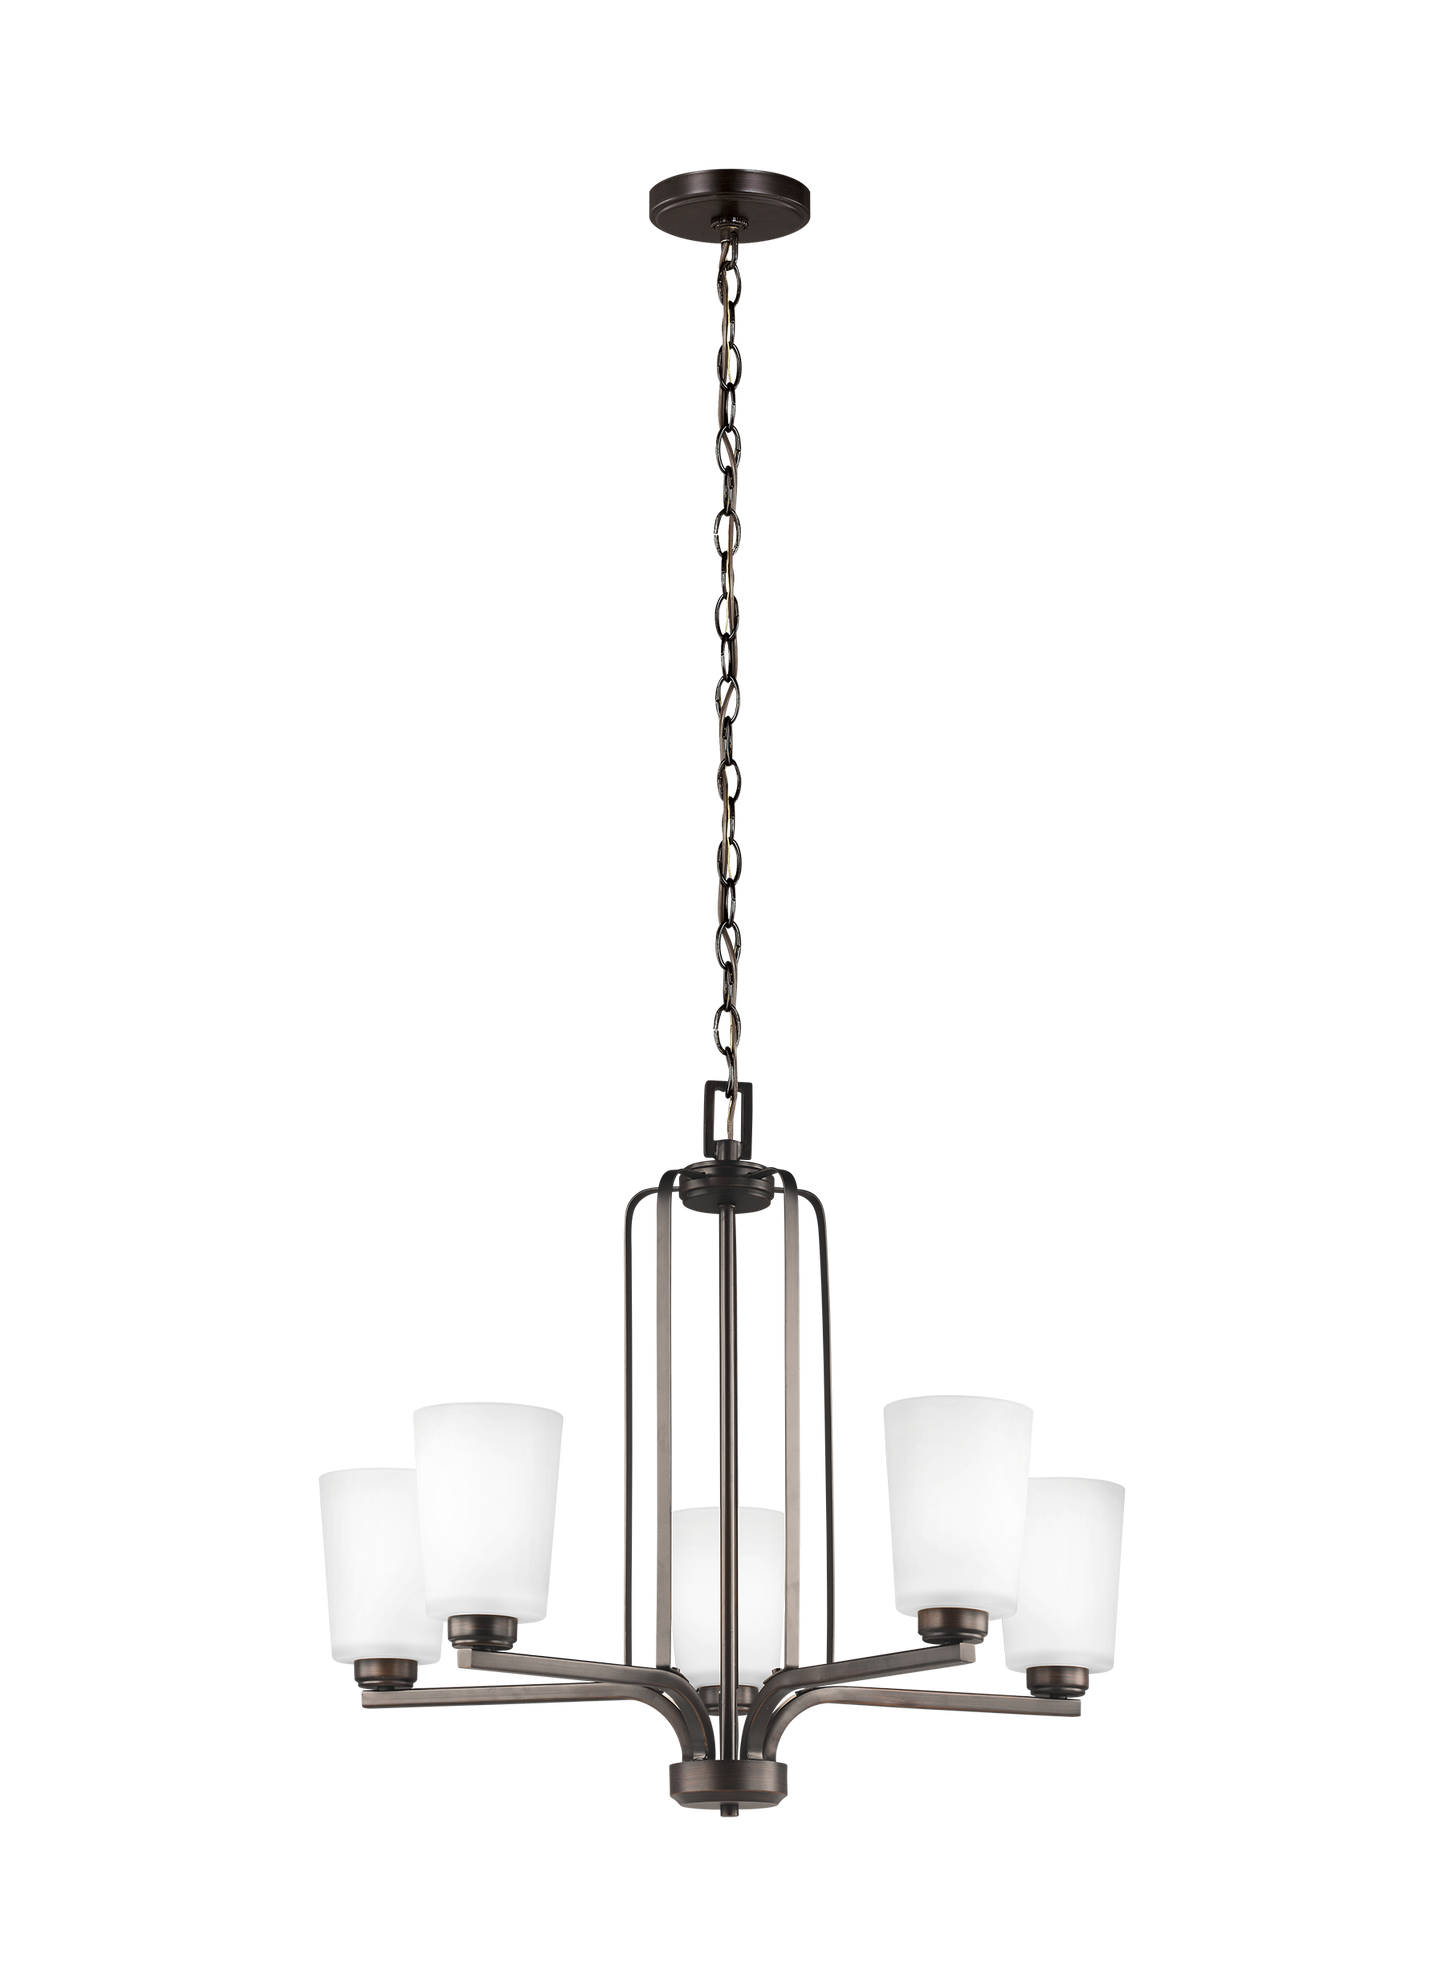 Franport transitional 5-light indoor dimmable ceiling chandelier pendant light in bronze finish with undefined glass shades